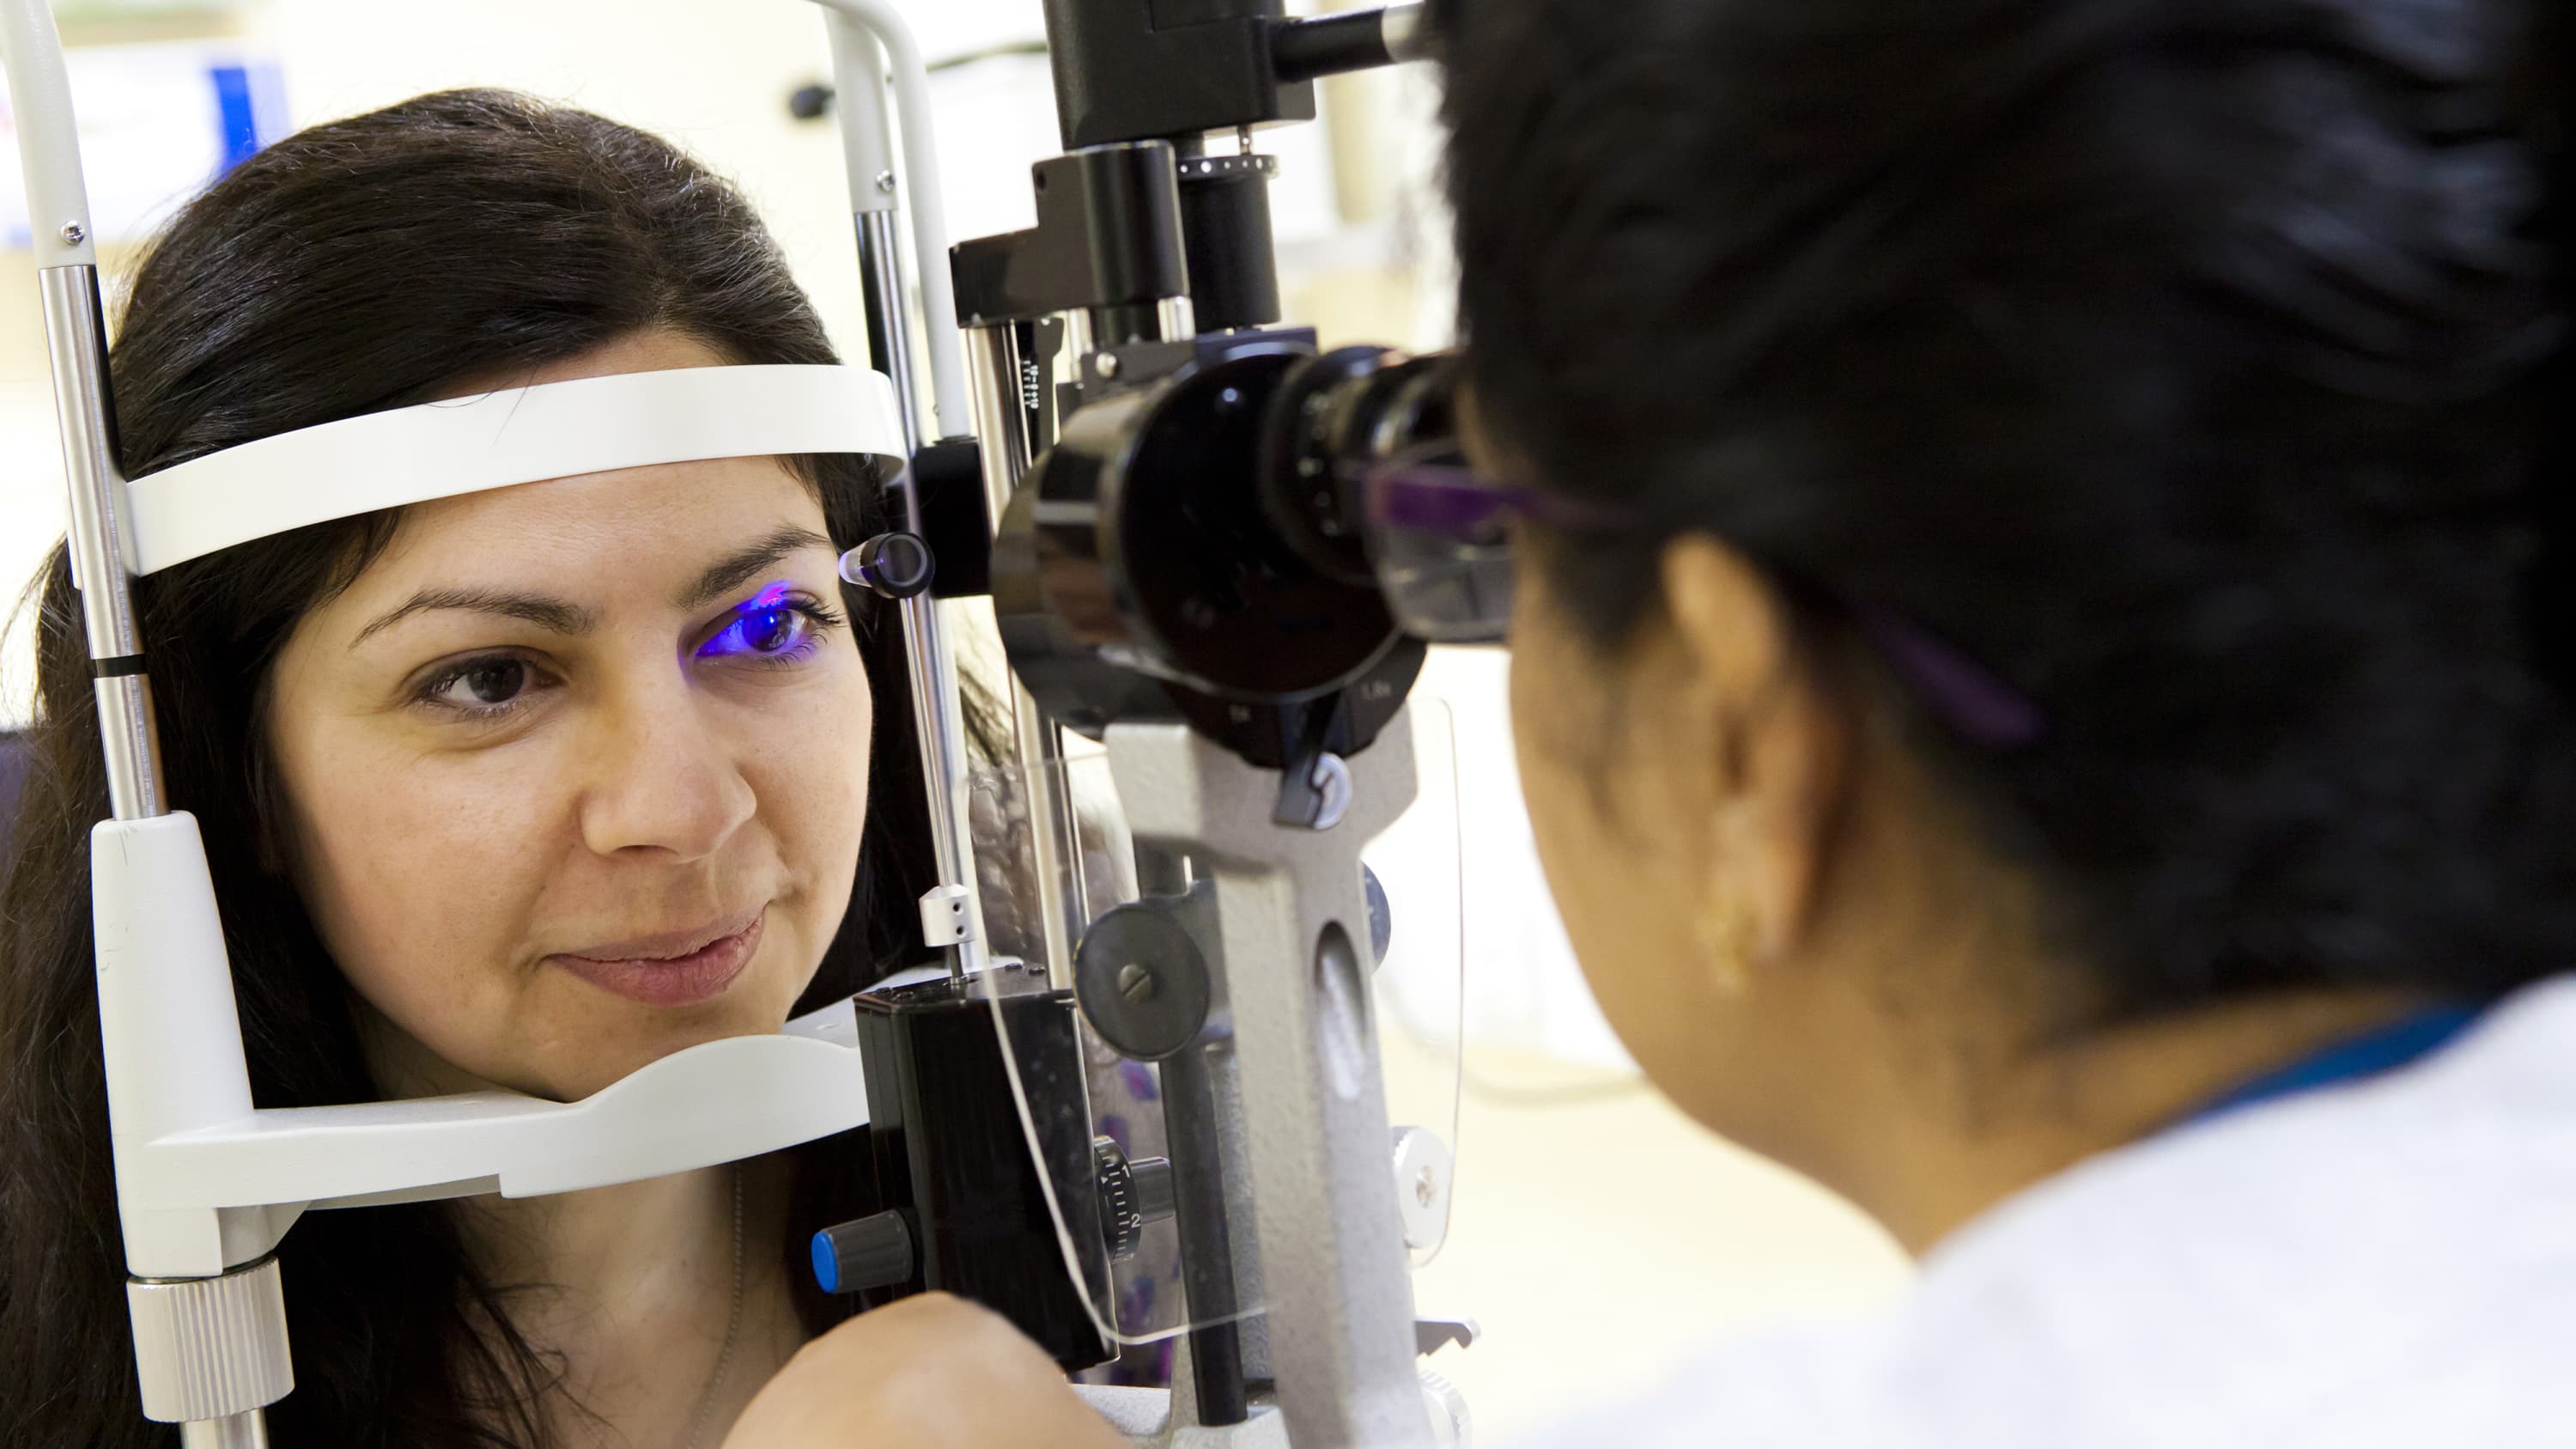 A woman has an eye exam, possibly for glaucoma